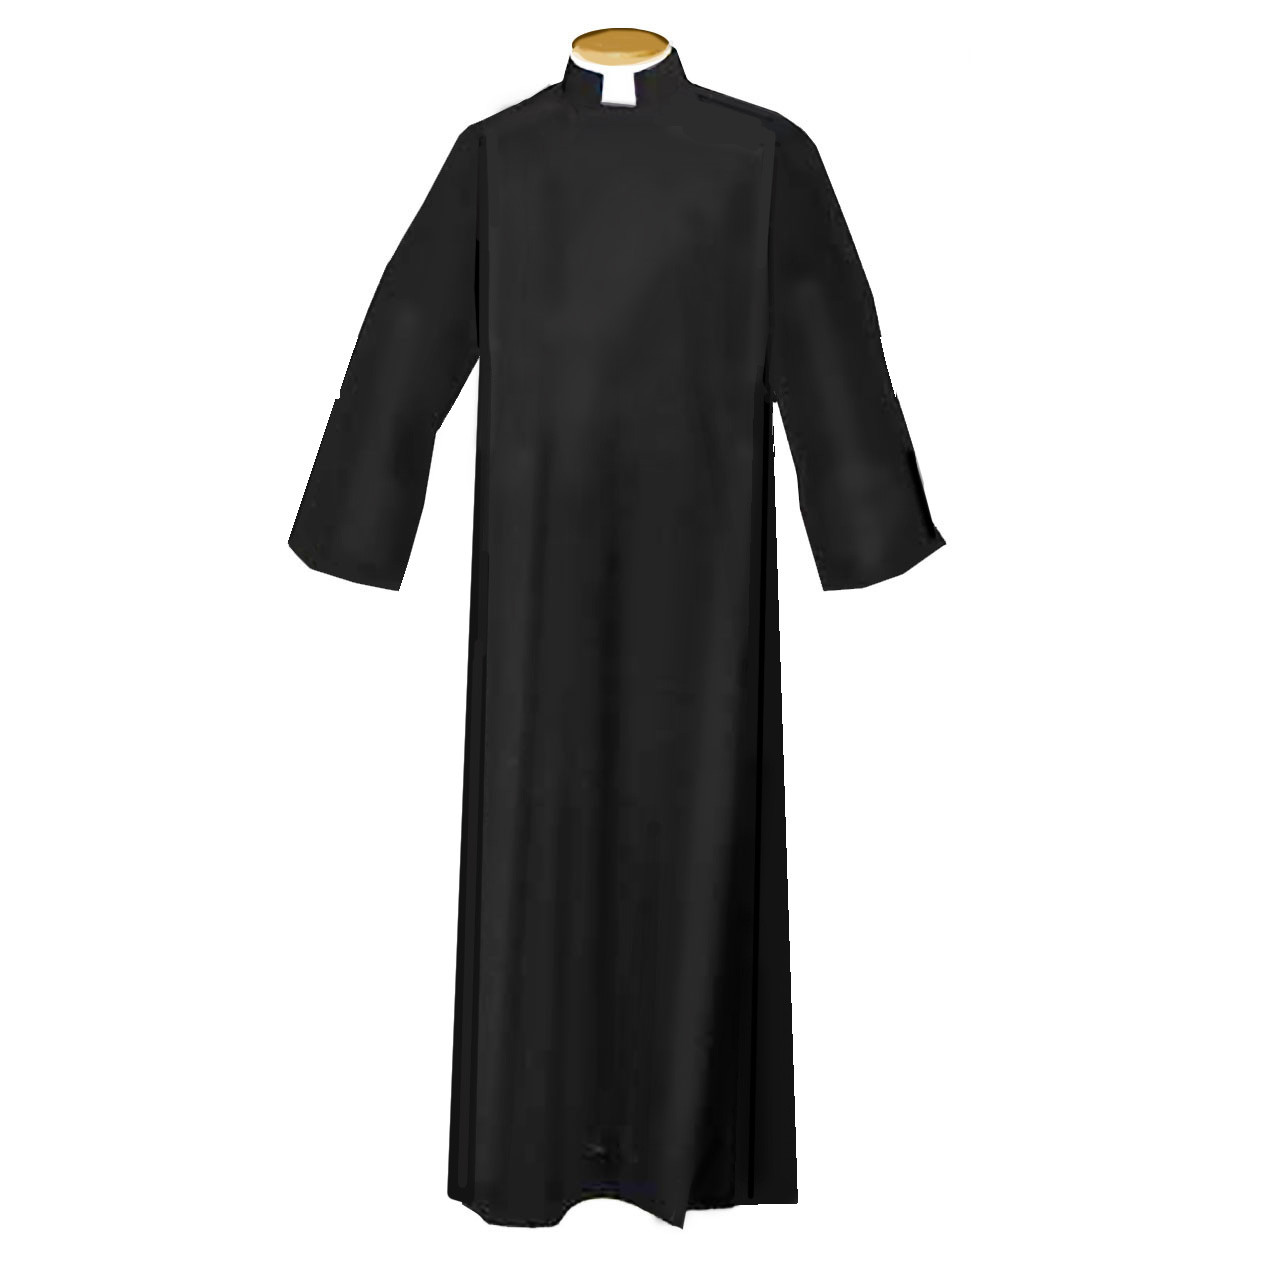 622 Anglican Style Cassock from Beau Veste | St. Patrick's Guild